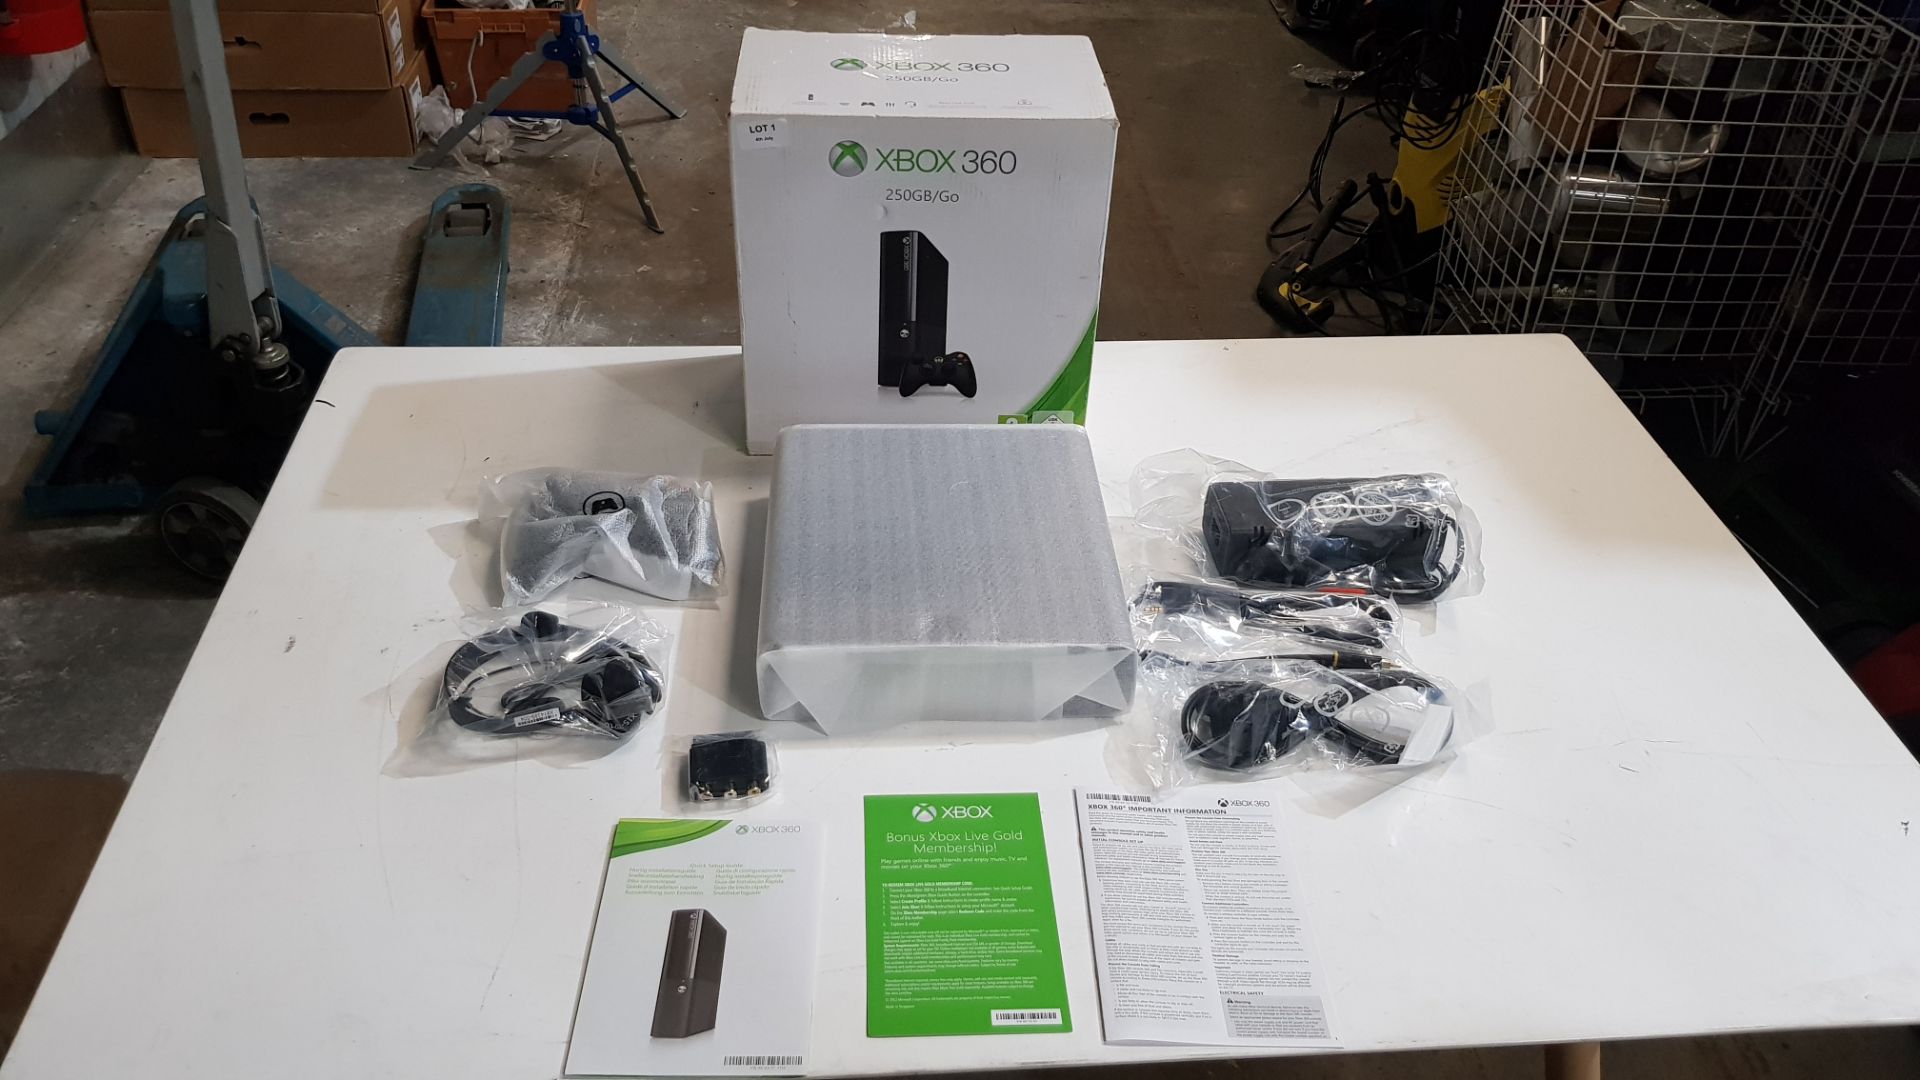 1x Xbox 360 250GB Go. New, Sealed Unit. Opened For Contents Photograph. - Image 7 of 8